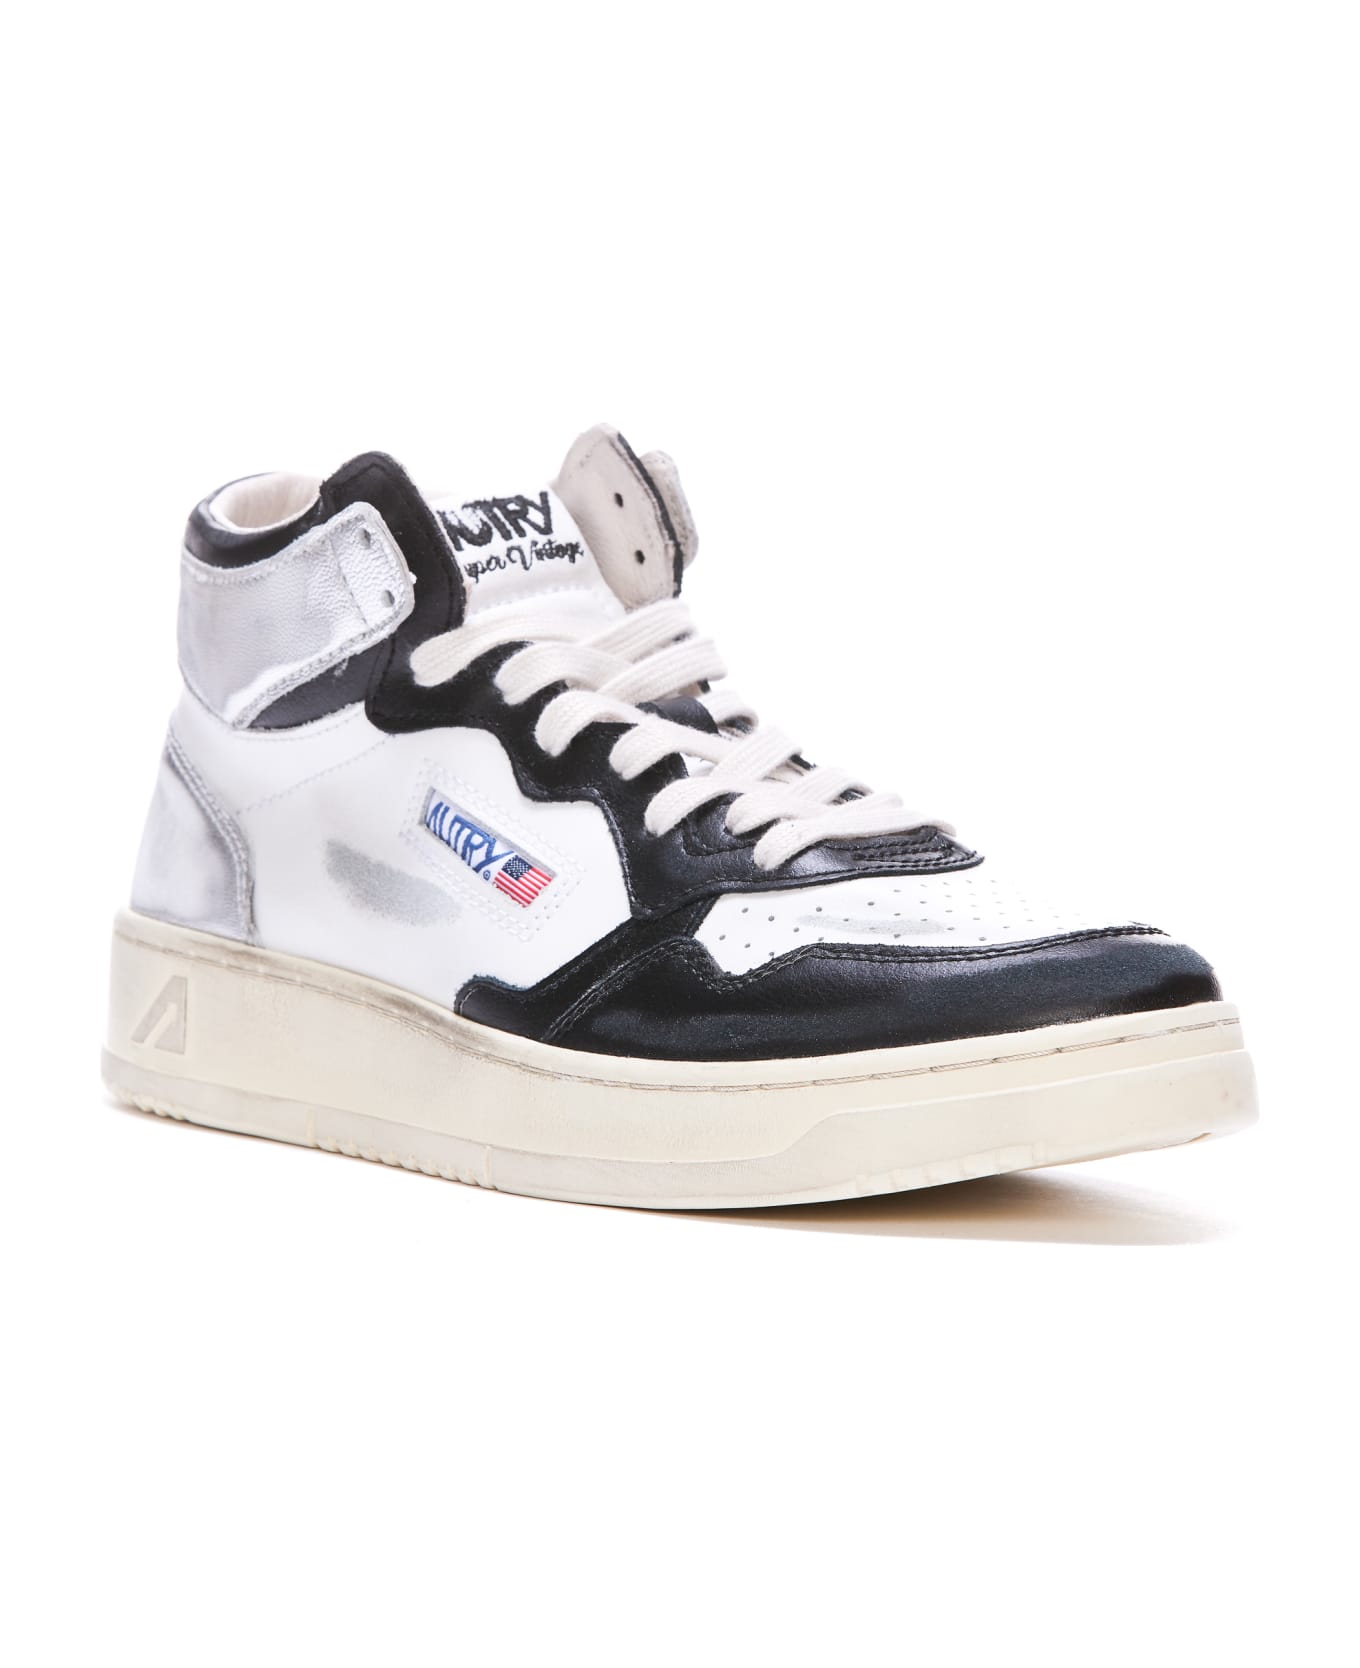 Autry Vintage Medalist Mid Sneakers - White, black, silver スニーカー